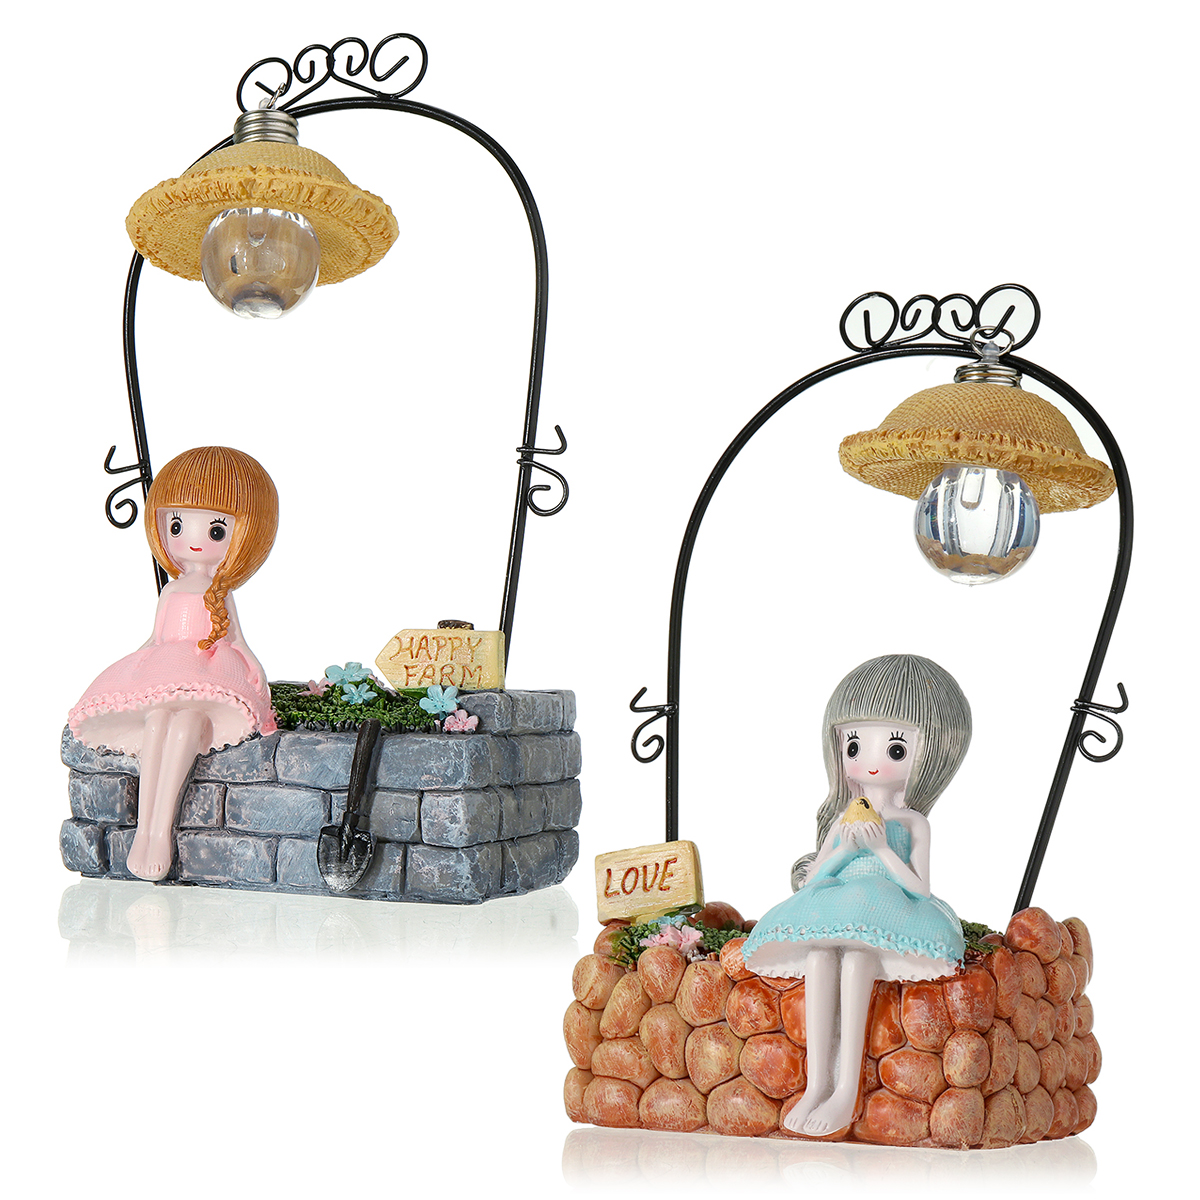 Creative-Farm-Girl-Table-Night-Light-Resin-Craft-Character-Ornaments-Xmas-Gifts-1640922-5